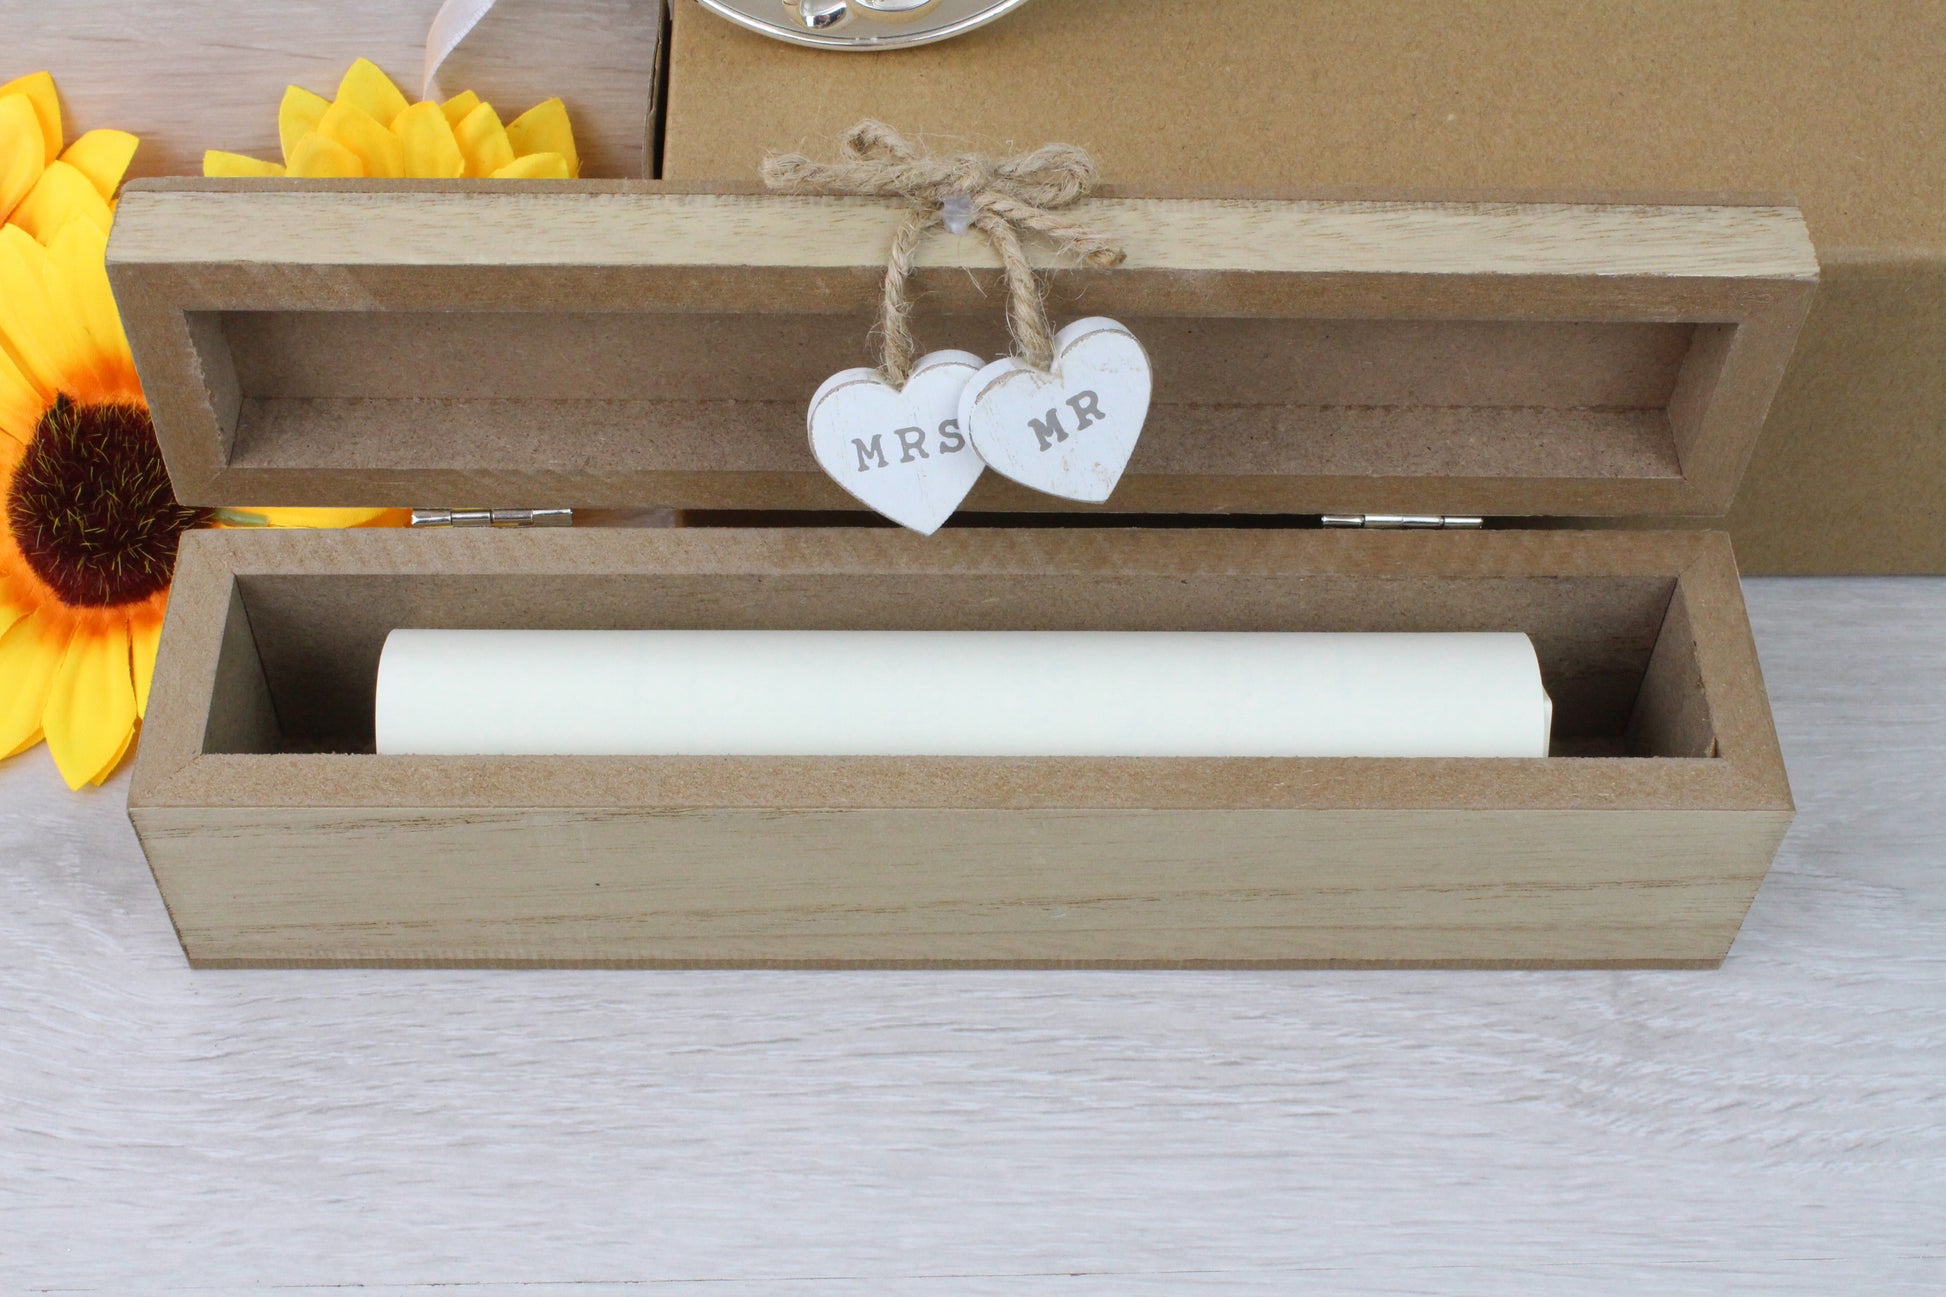 The Personalised Wedding Certificate Holder shows what it looks like inside the box, with a certificate as a sample.